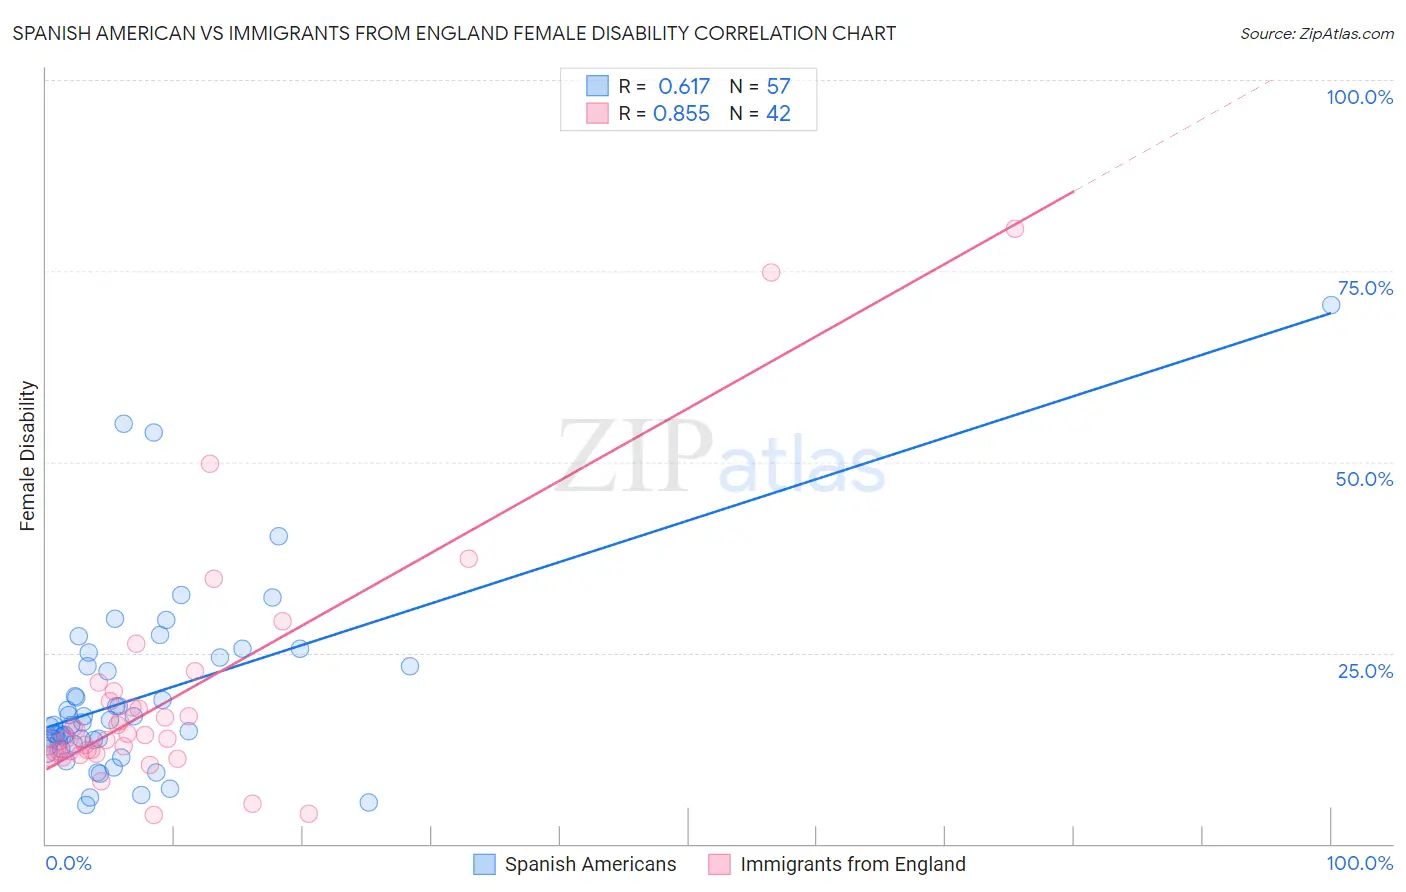 Spanish American vs Immigrants from England Female Disability